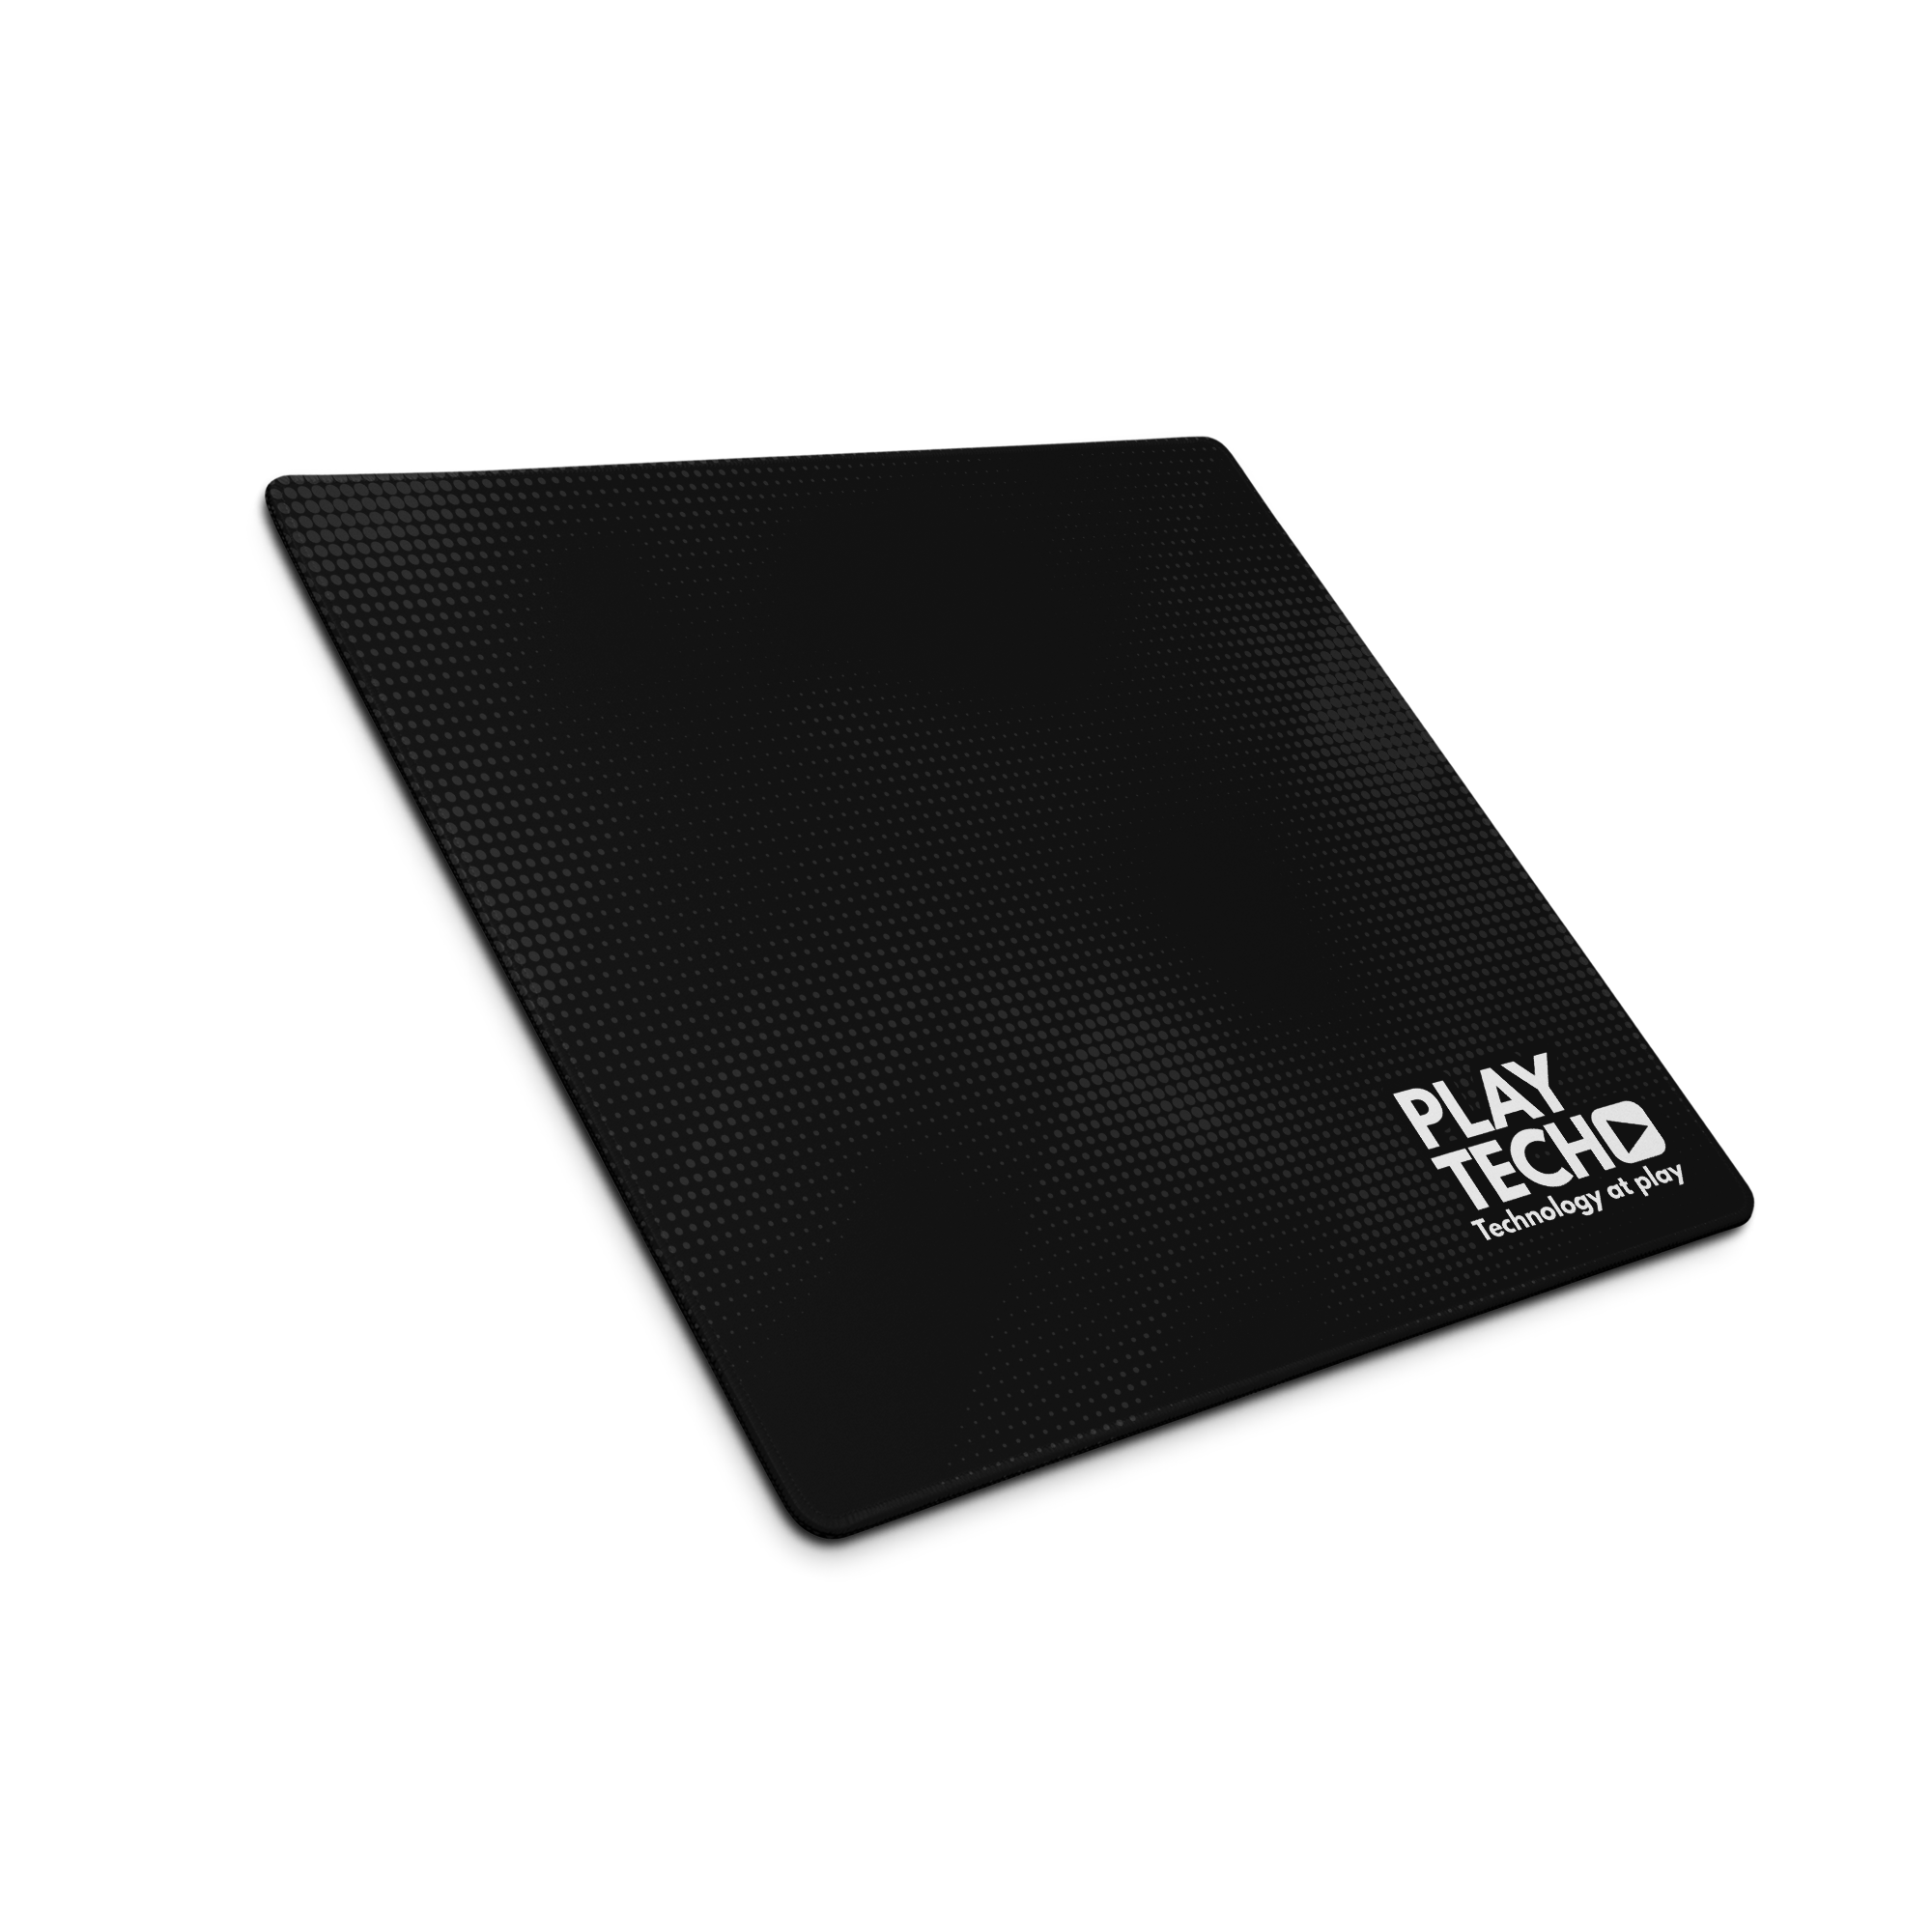 Playtech Gaming mouse pad - Playtech